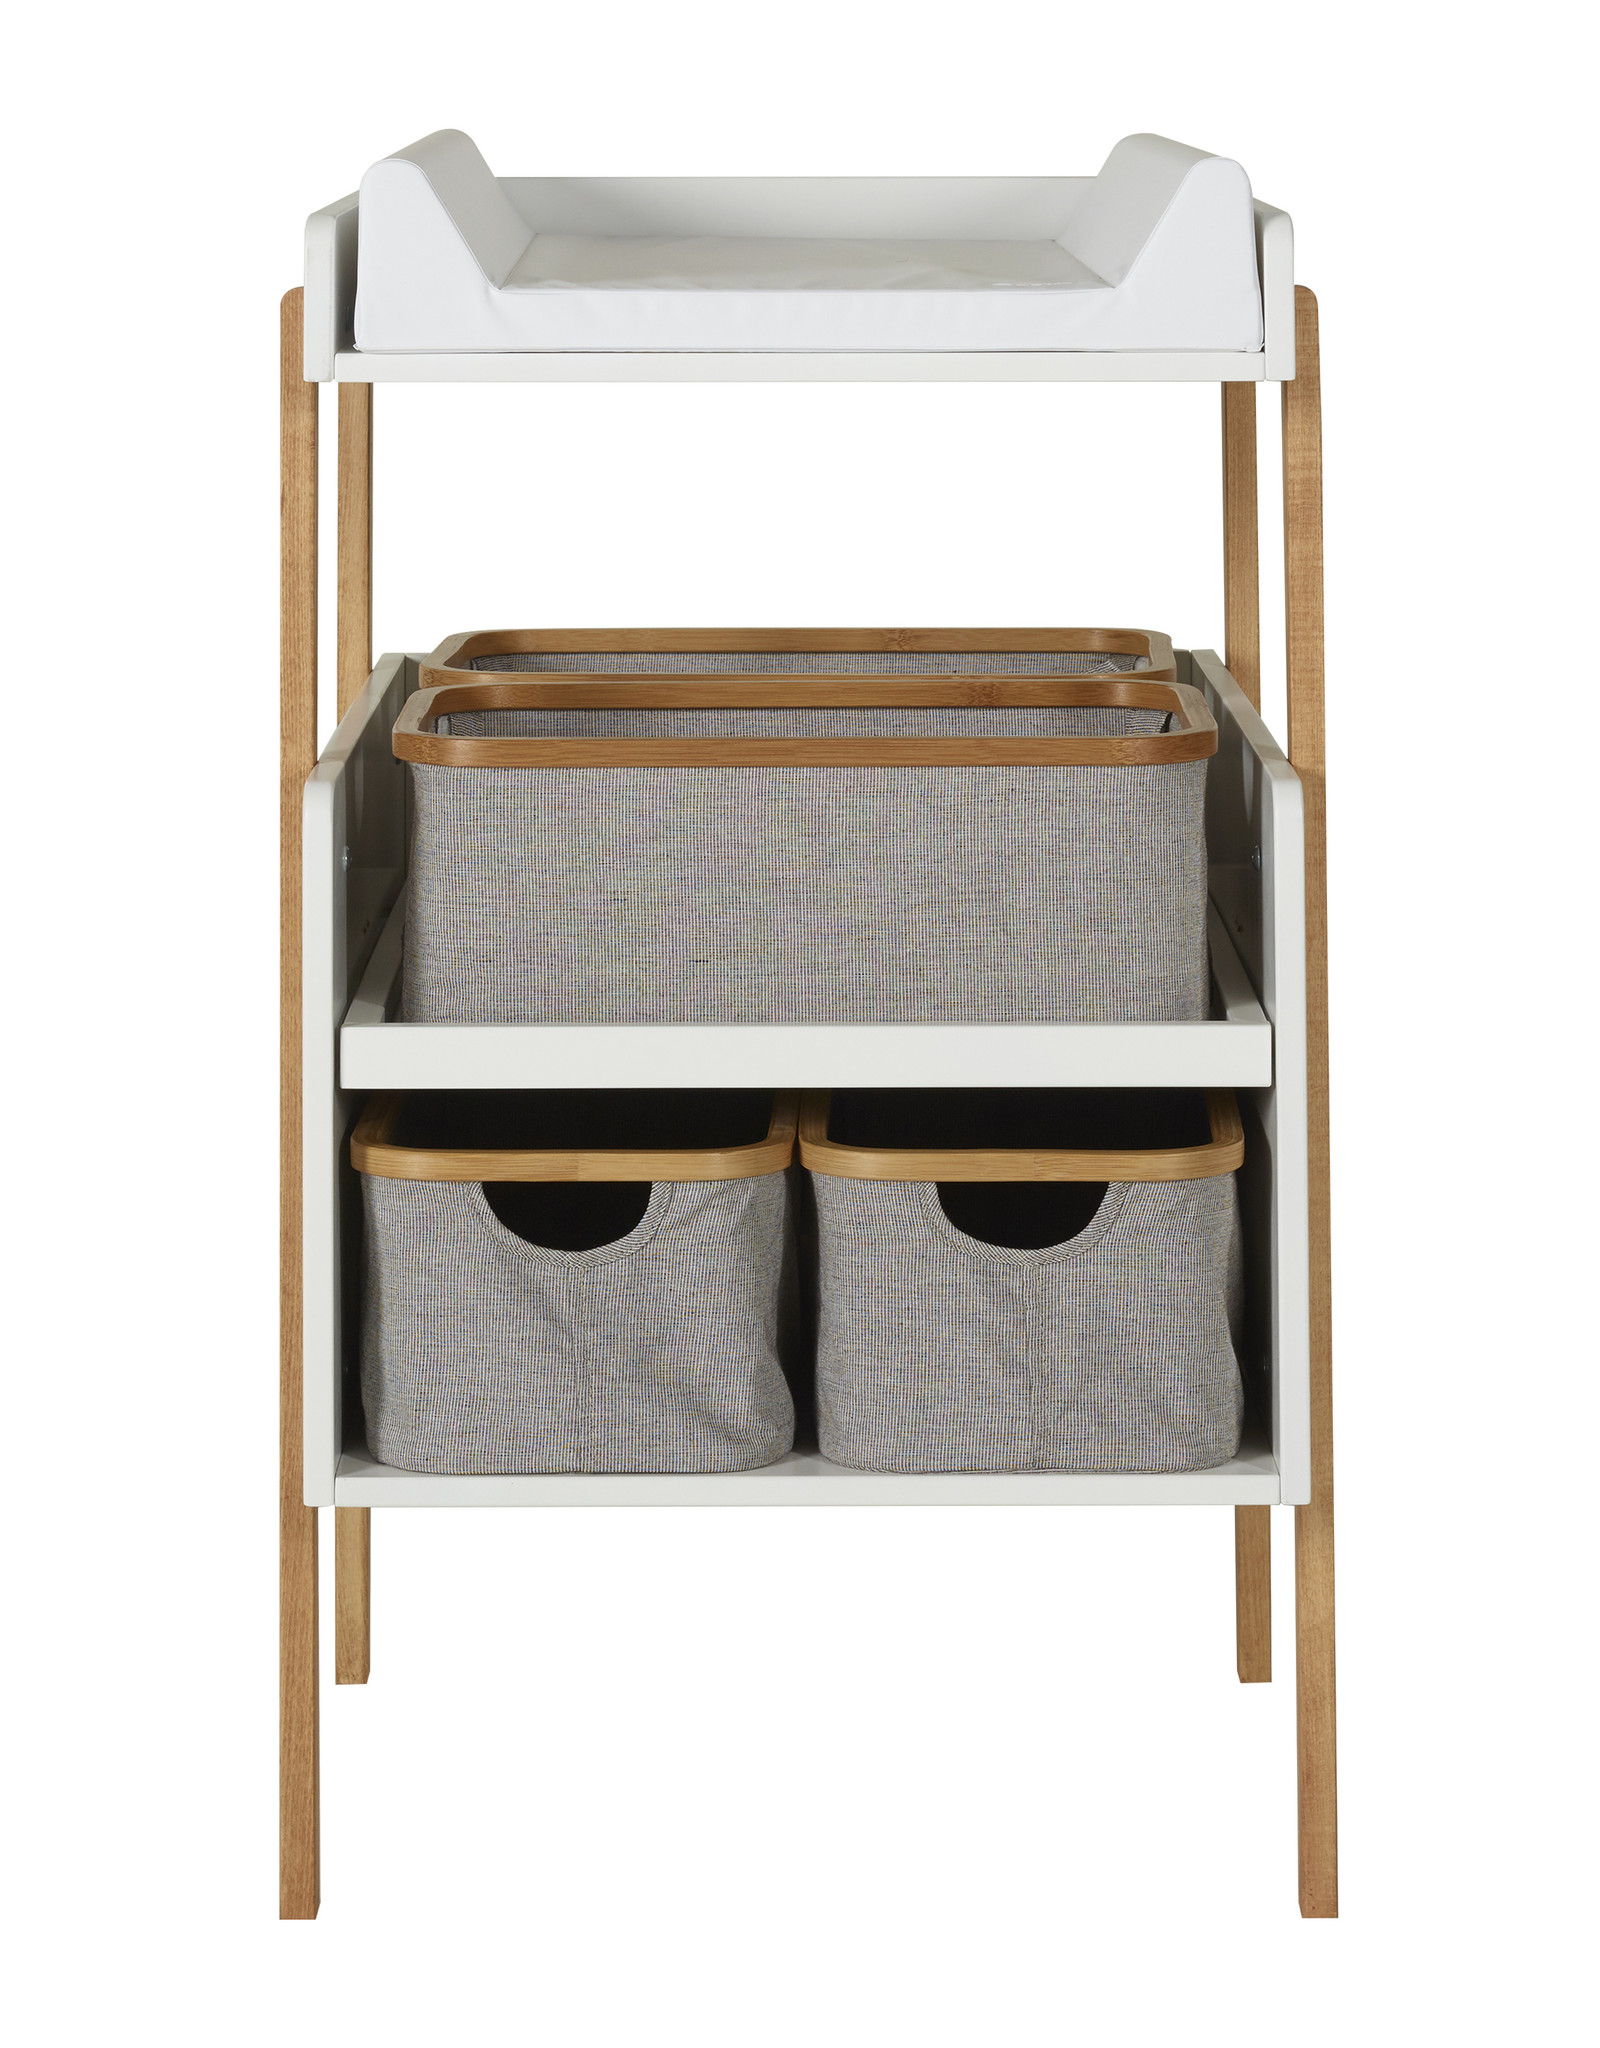 Quax Changing Table Vintage- White/natural